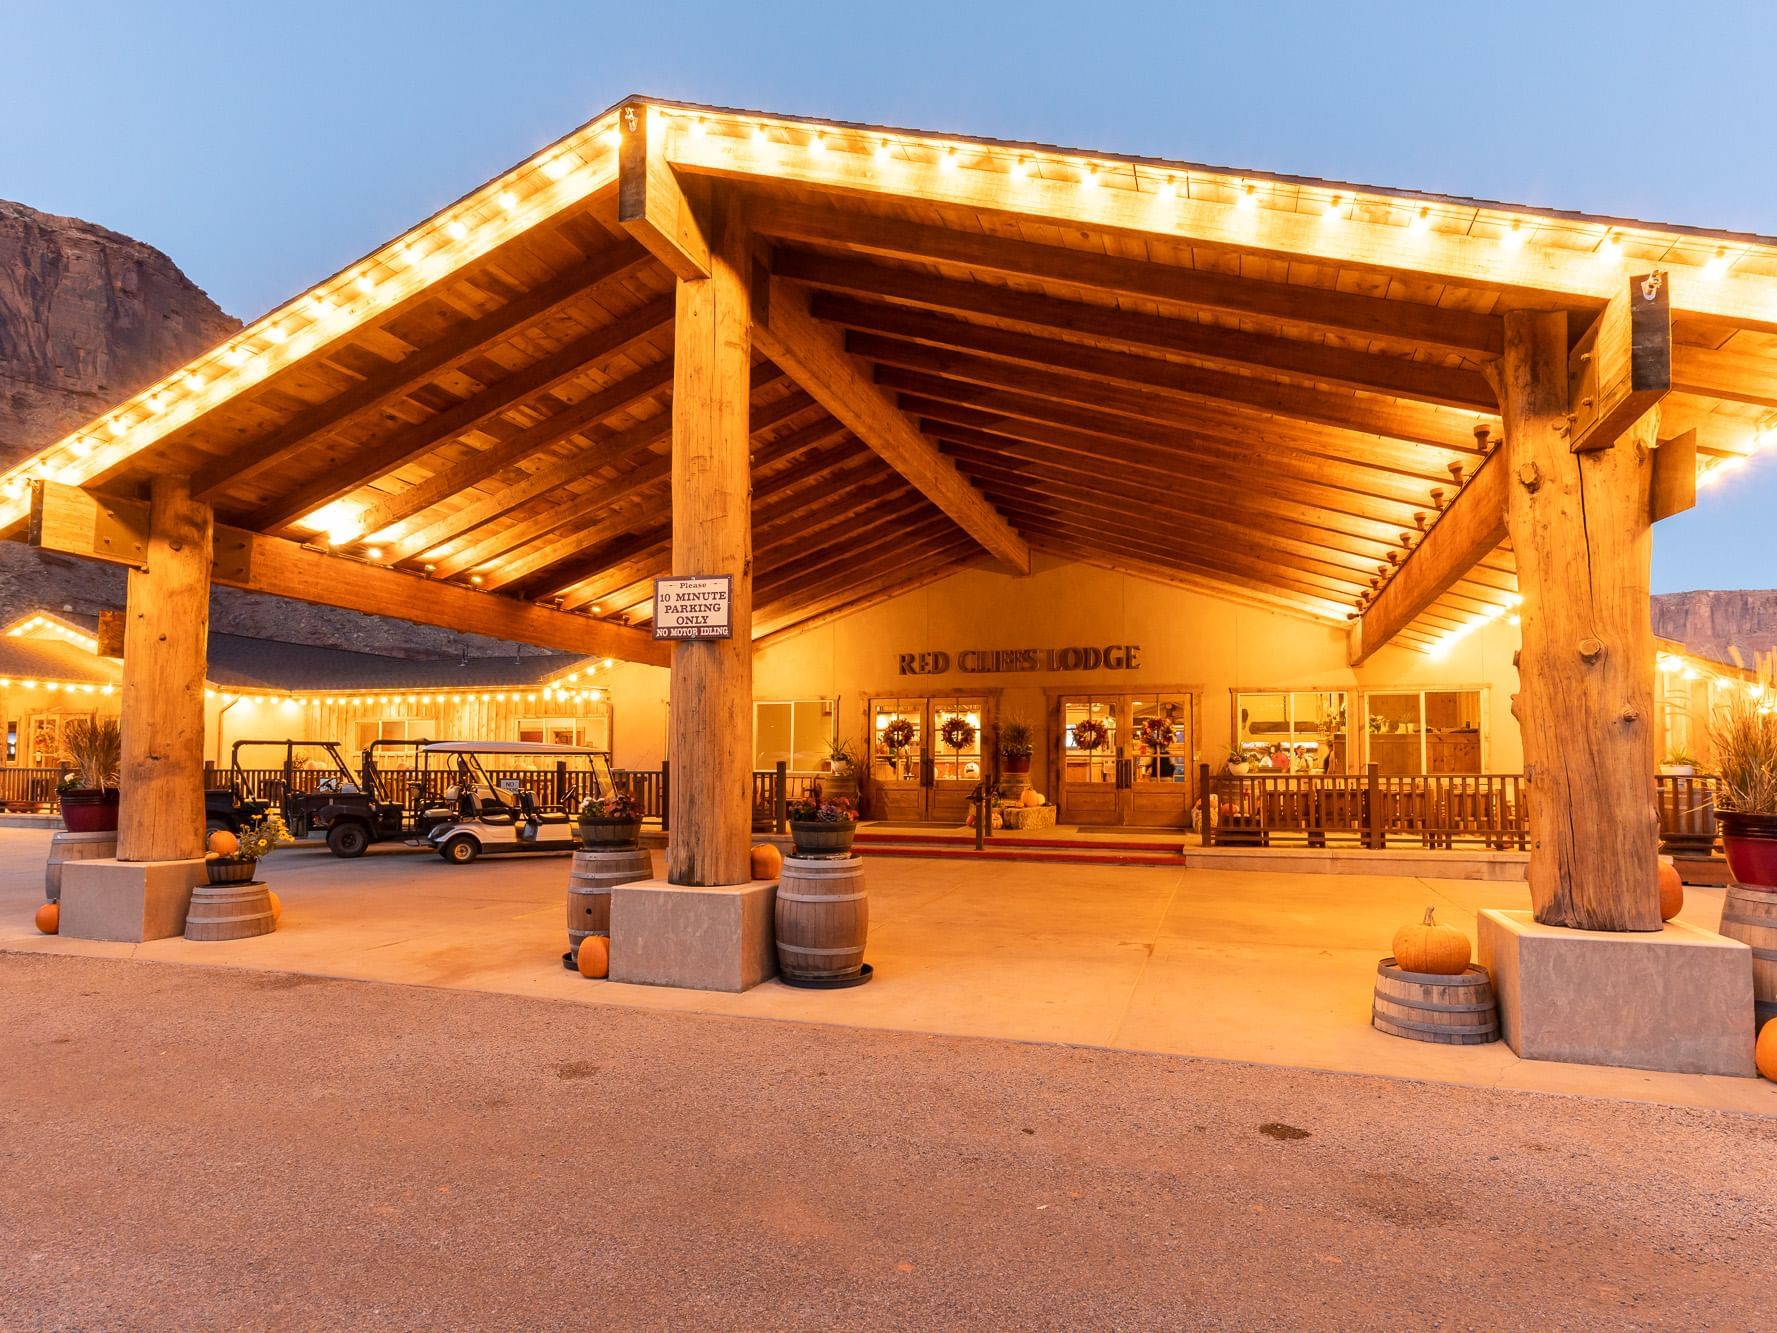 Red Cliffs Lodge Group